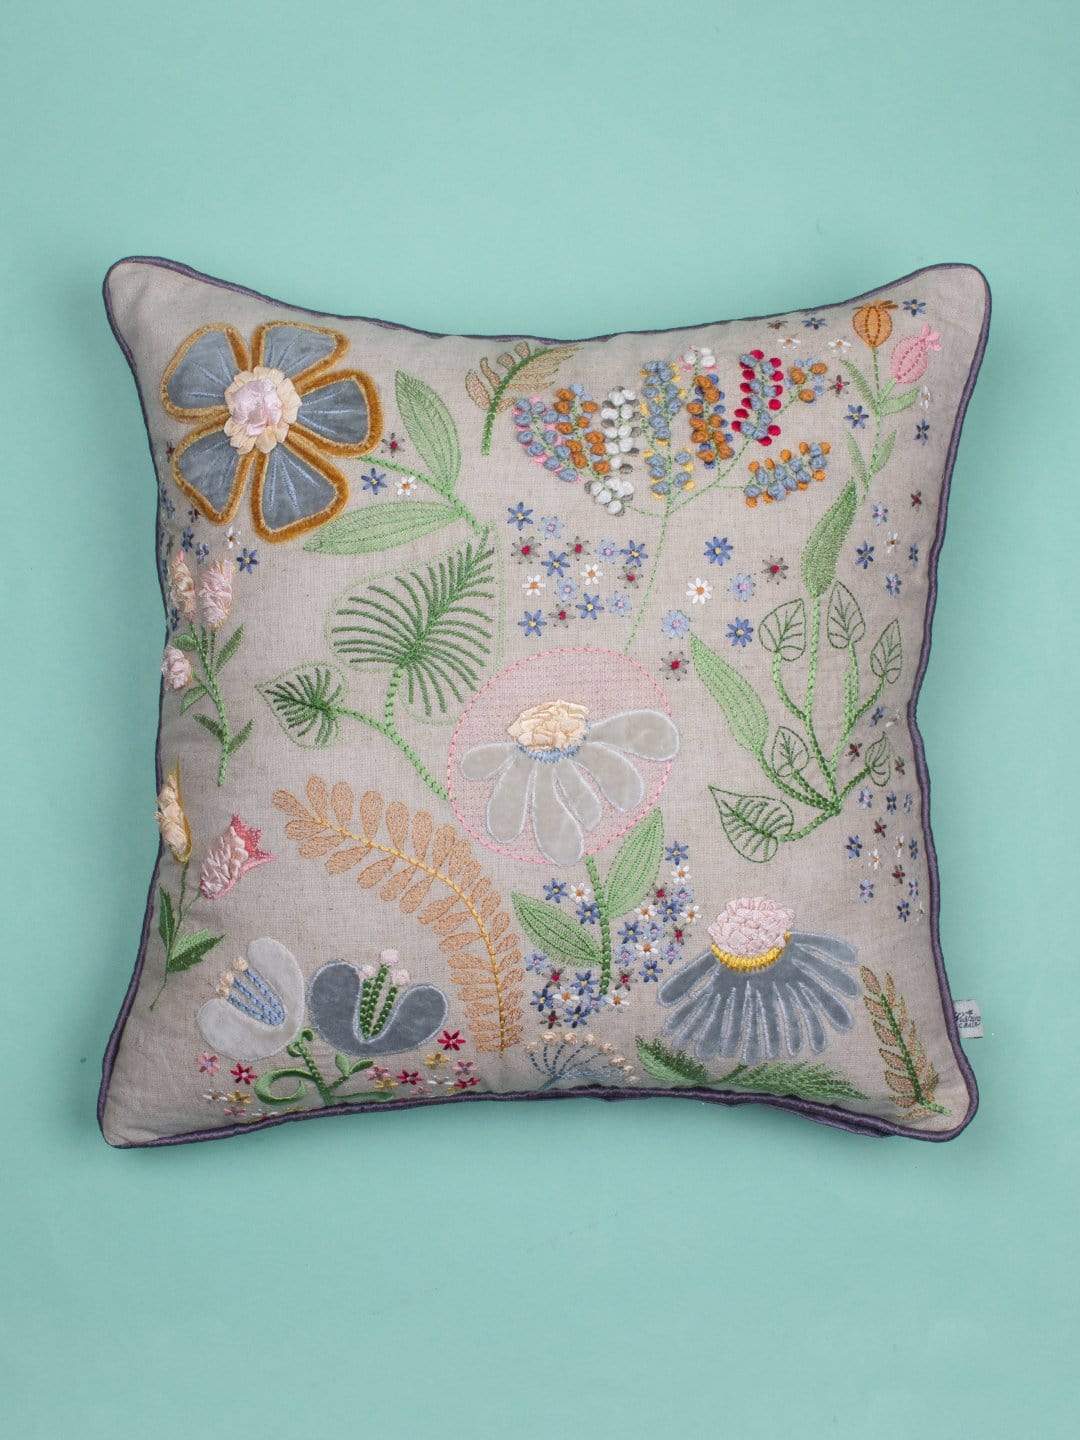 Daisy Embroidered Cushion CoverMaterial: Front - 70% Cotton &amp; 30% Linen, Back- 100% Polyester
Dimensions: 18 x 18 Inch

Dry Clean only

 Daisy Embroidered Cushion CoverThe Wishing Chair